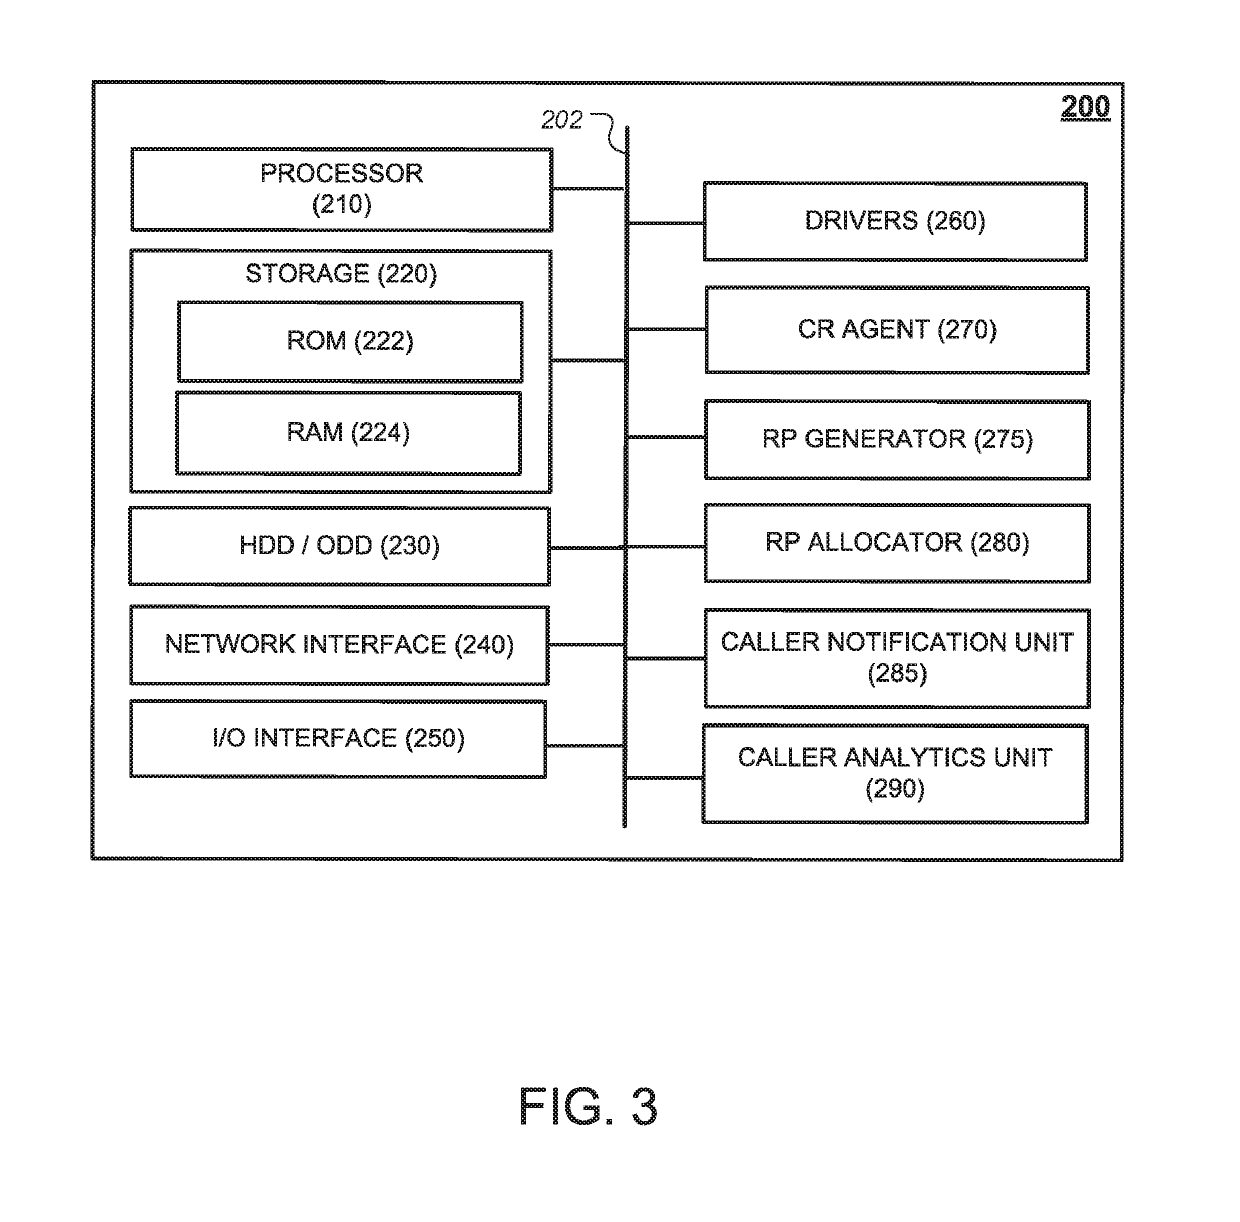 System and method for improving contact center operations by optimizing user connections